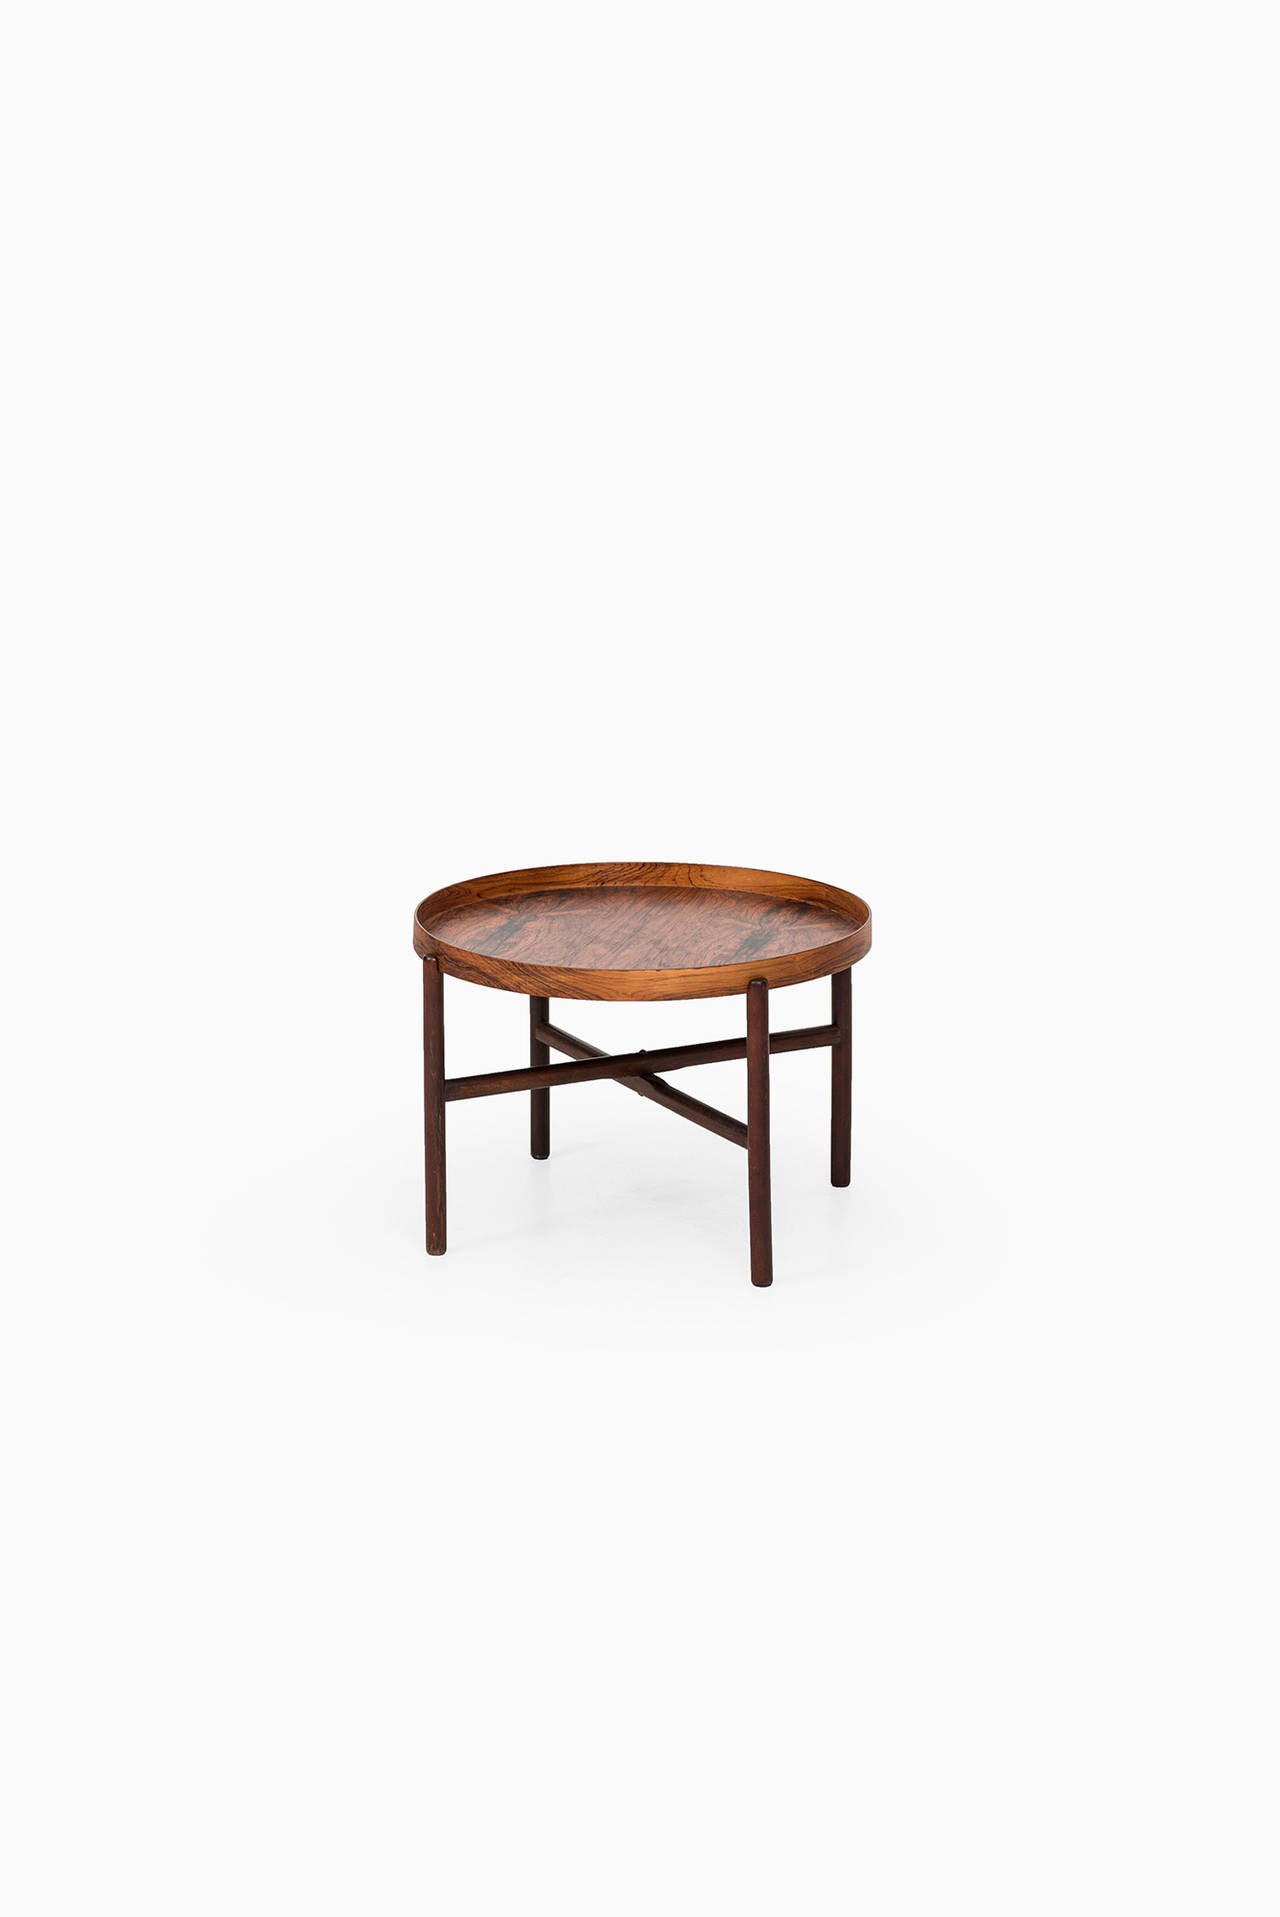 Rare side table in rosewood designed by Torsten Johansson. Produced by AB Formträ in Sweden.